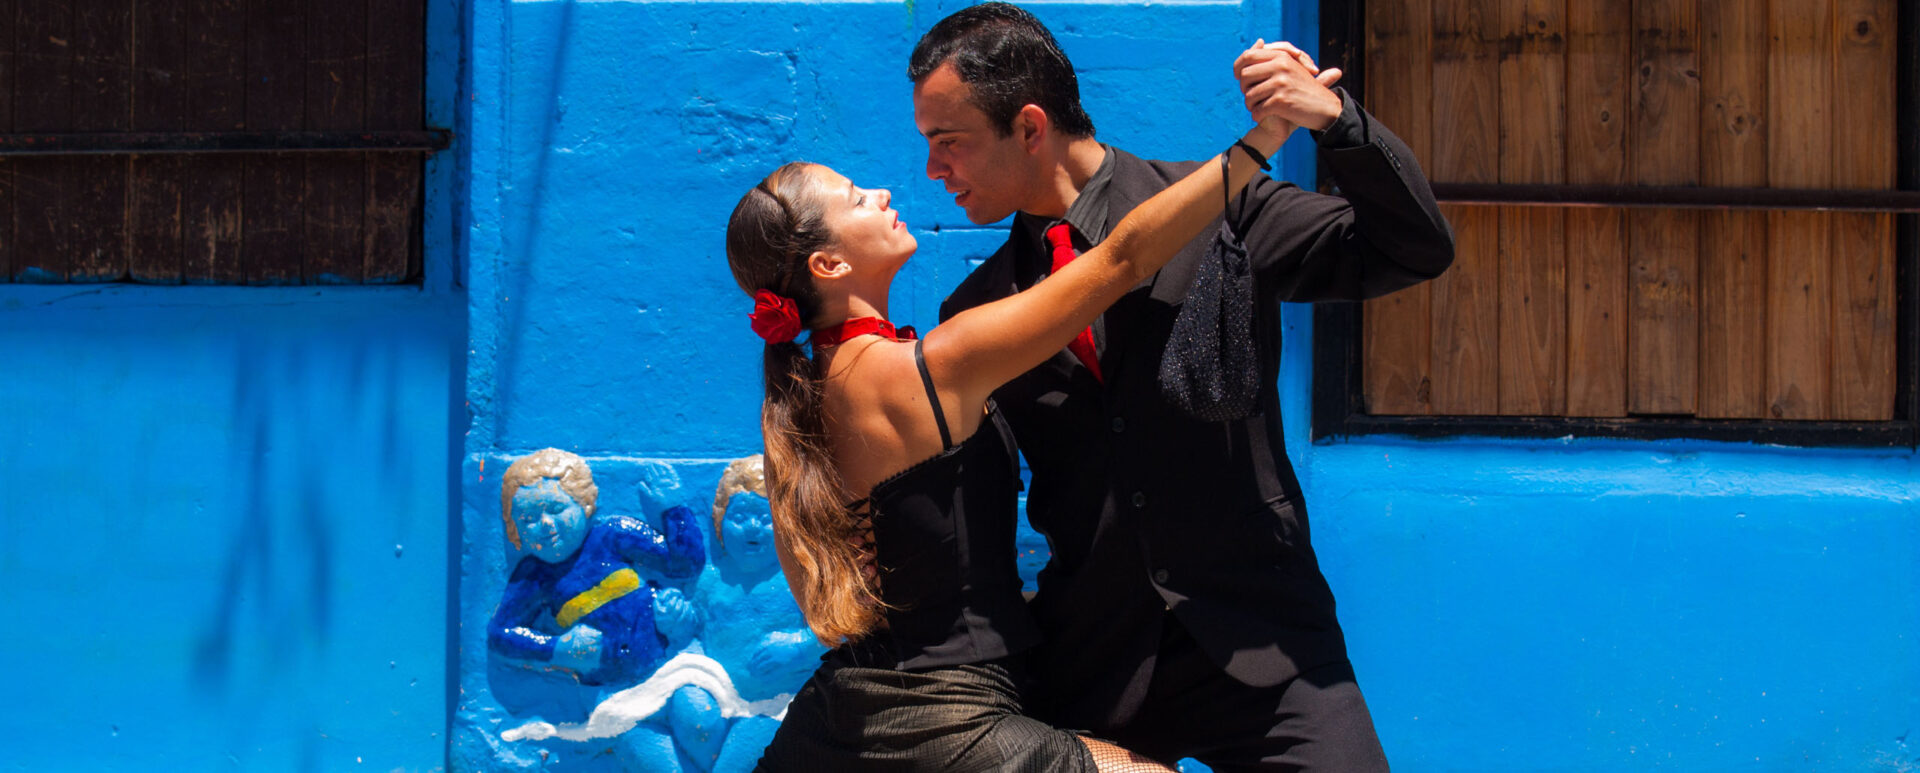 A taste of Tango in Argentina